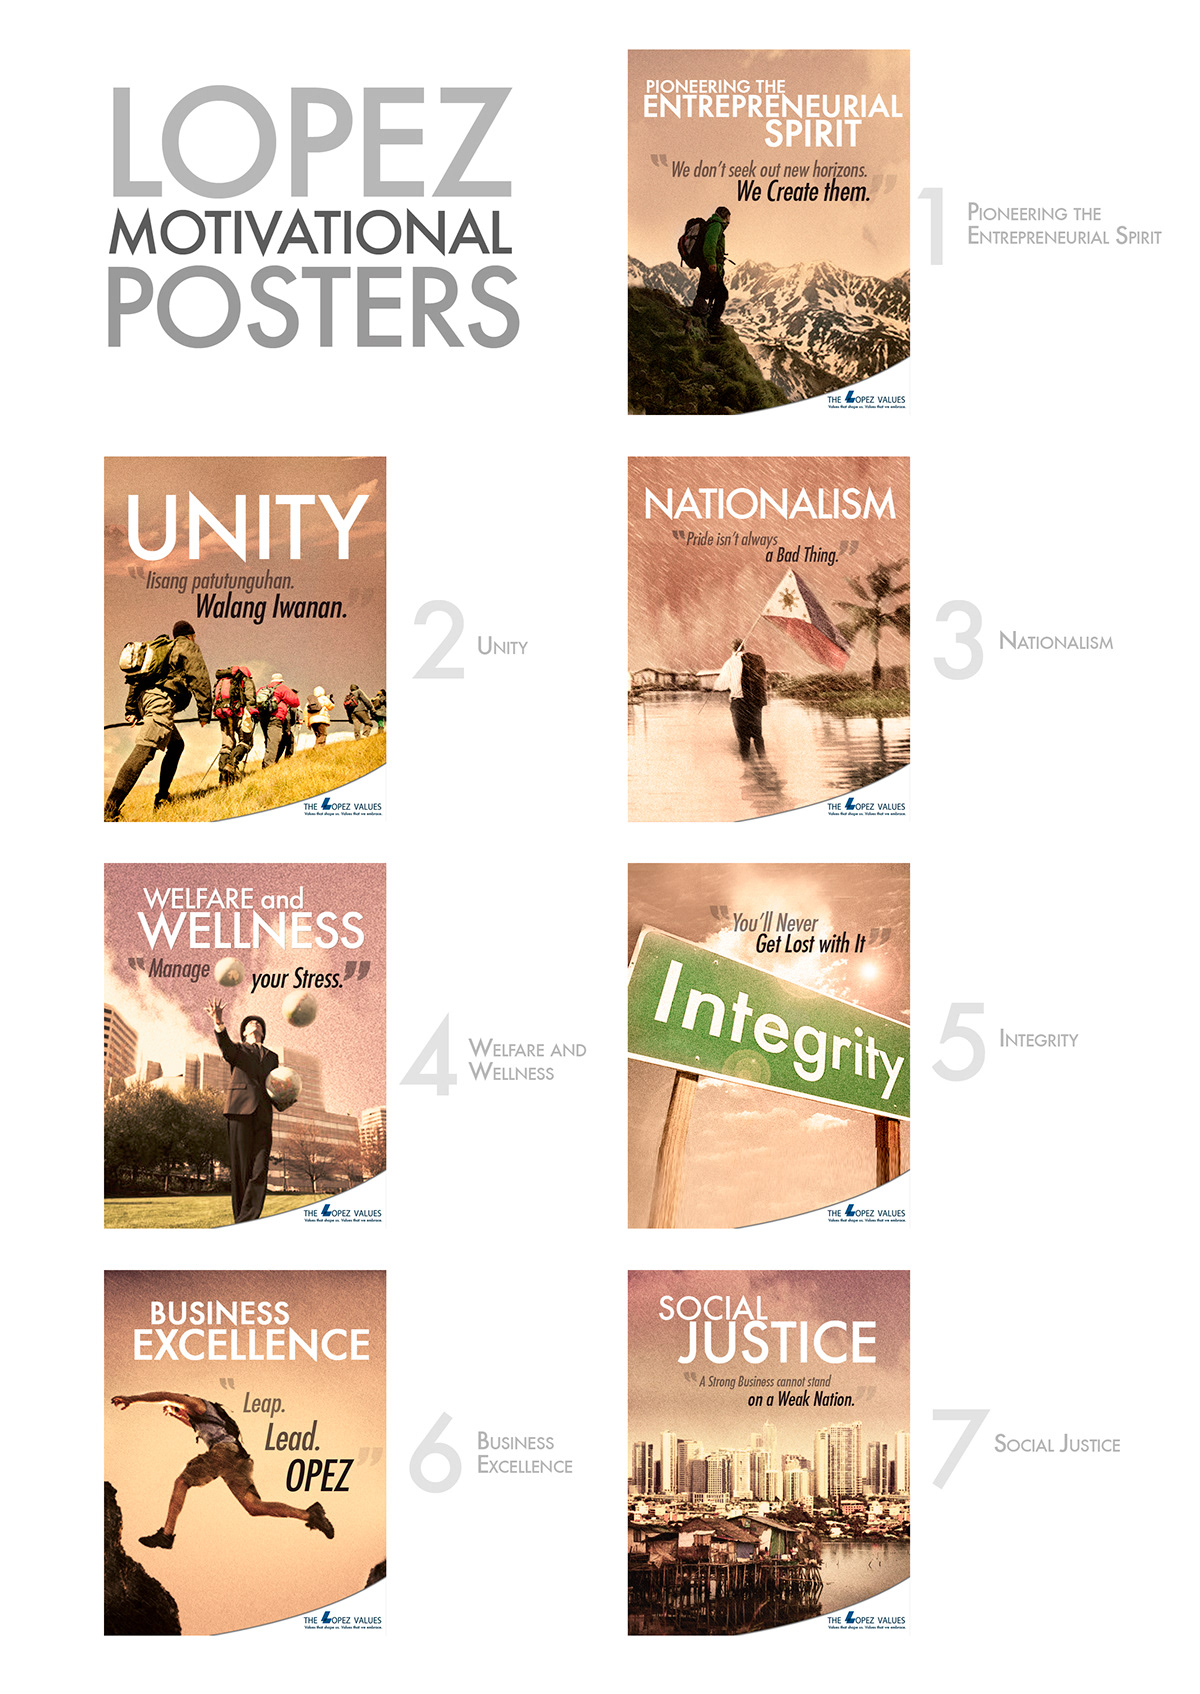 posters motivational corporate brand business operations employees filipino philippines Values HR pr CSR communications